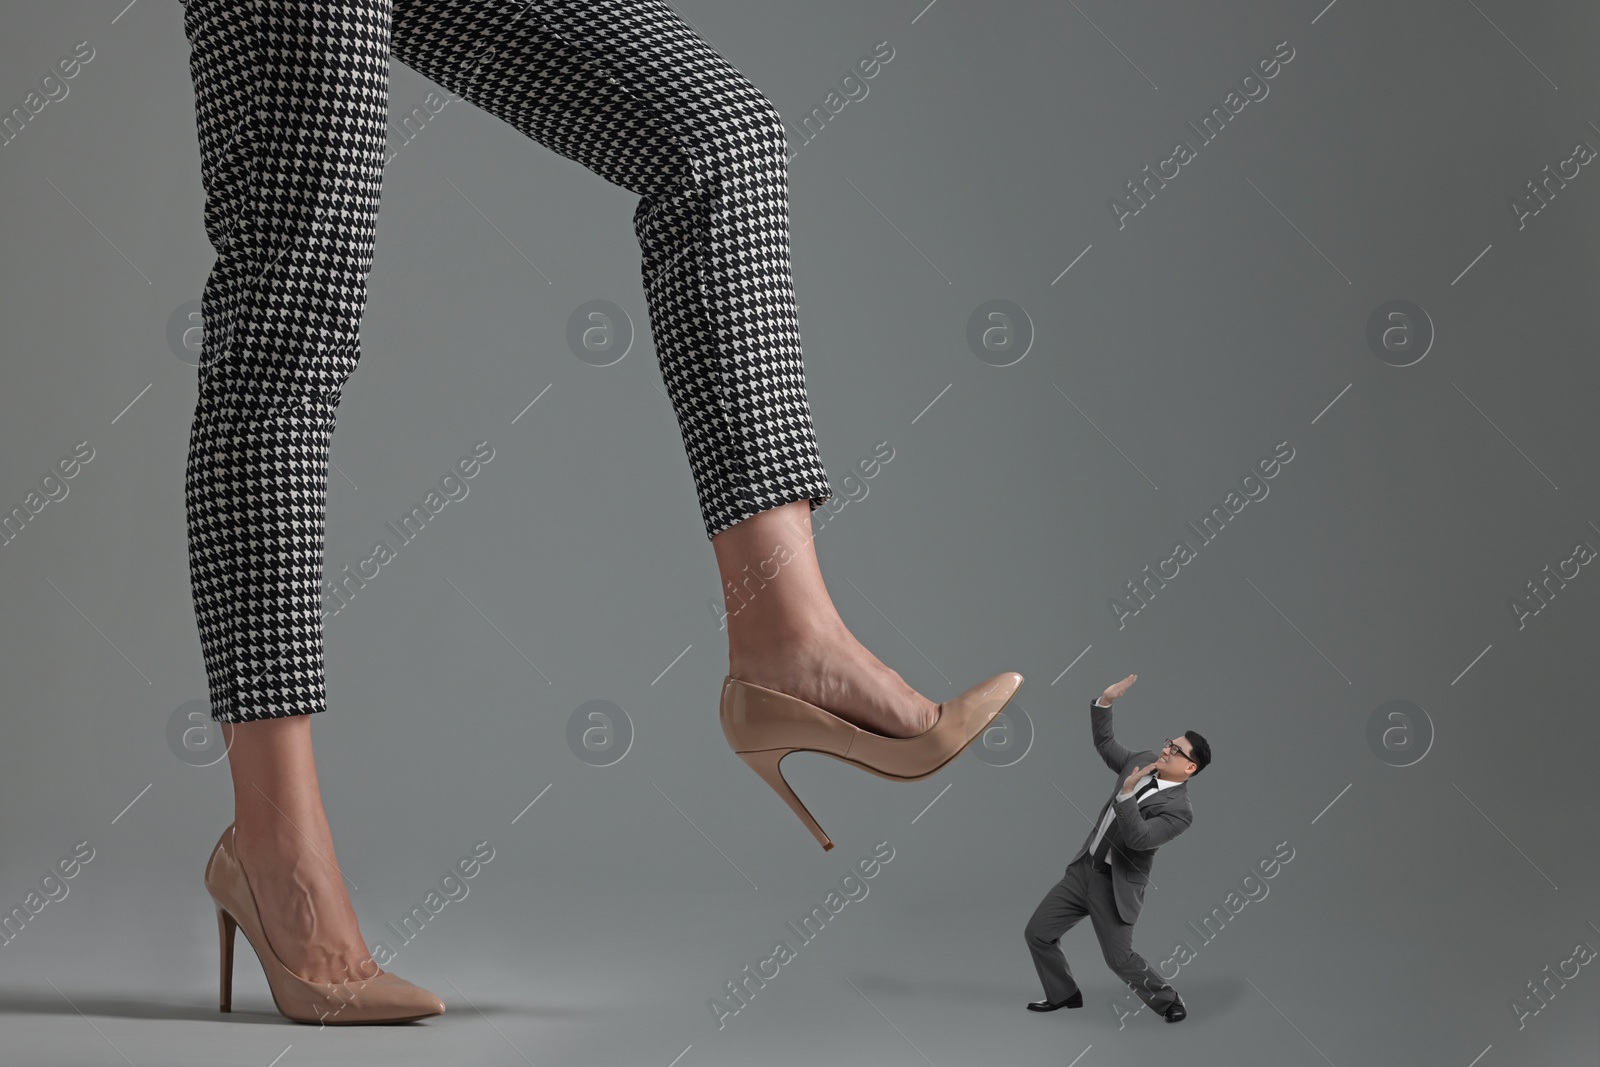 Image of Big woman stepping onto small man on grey background